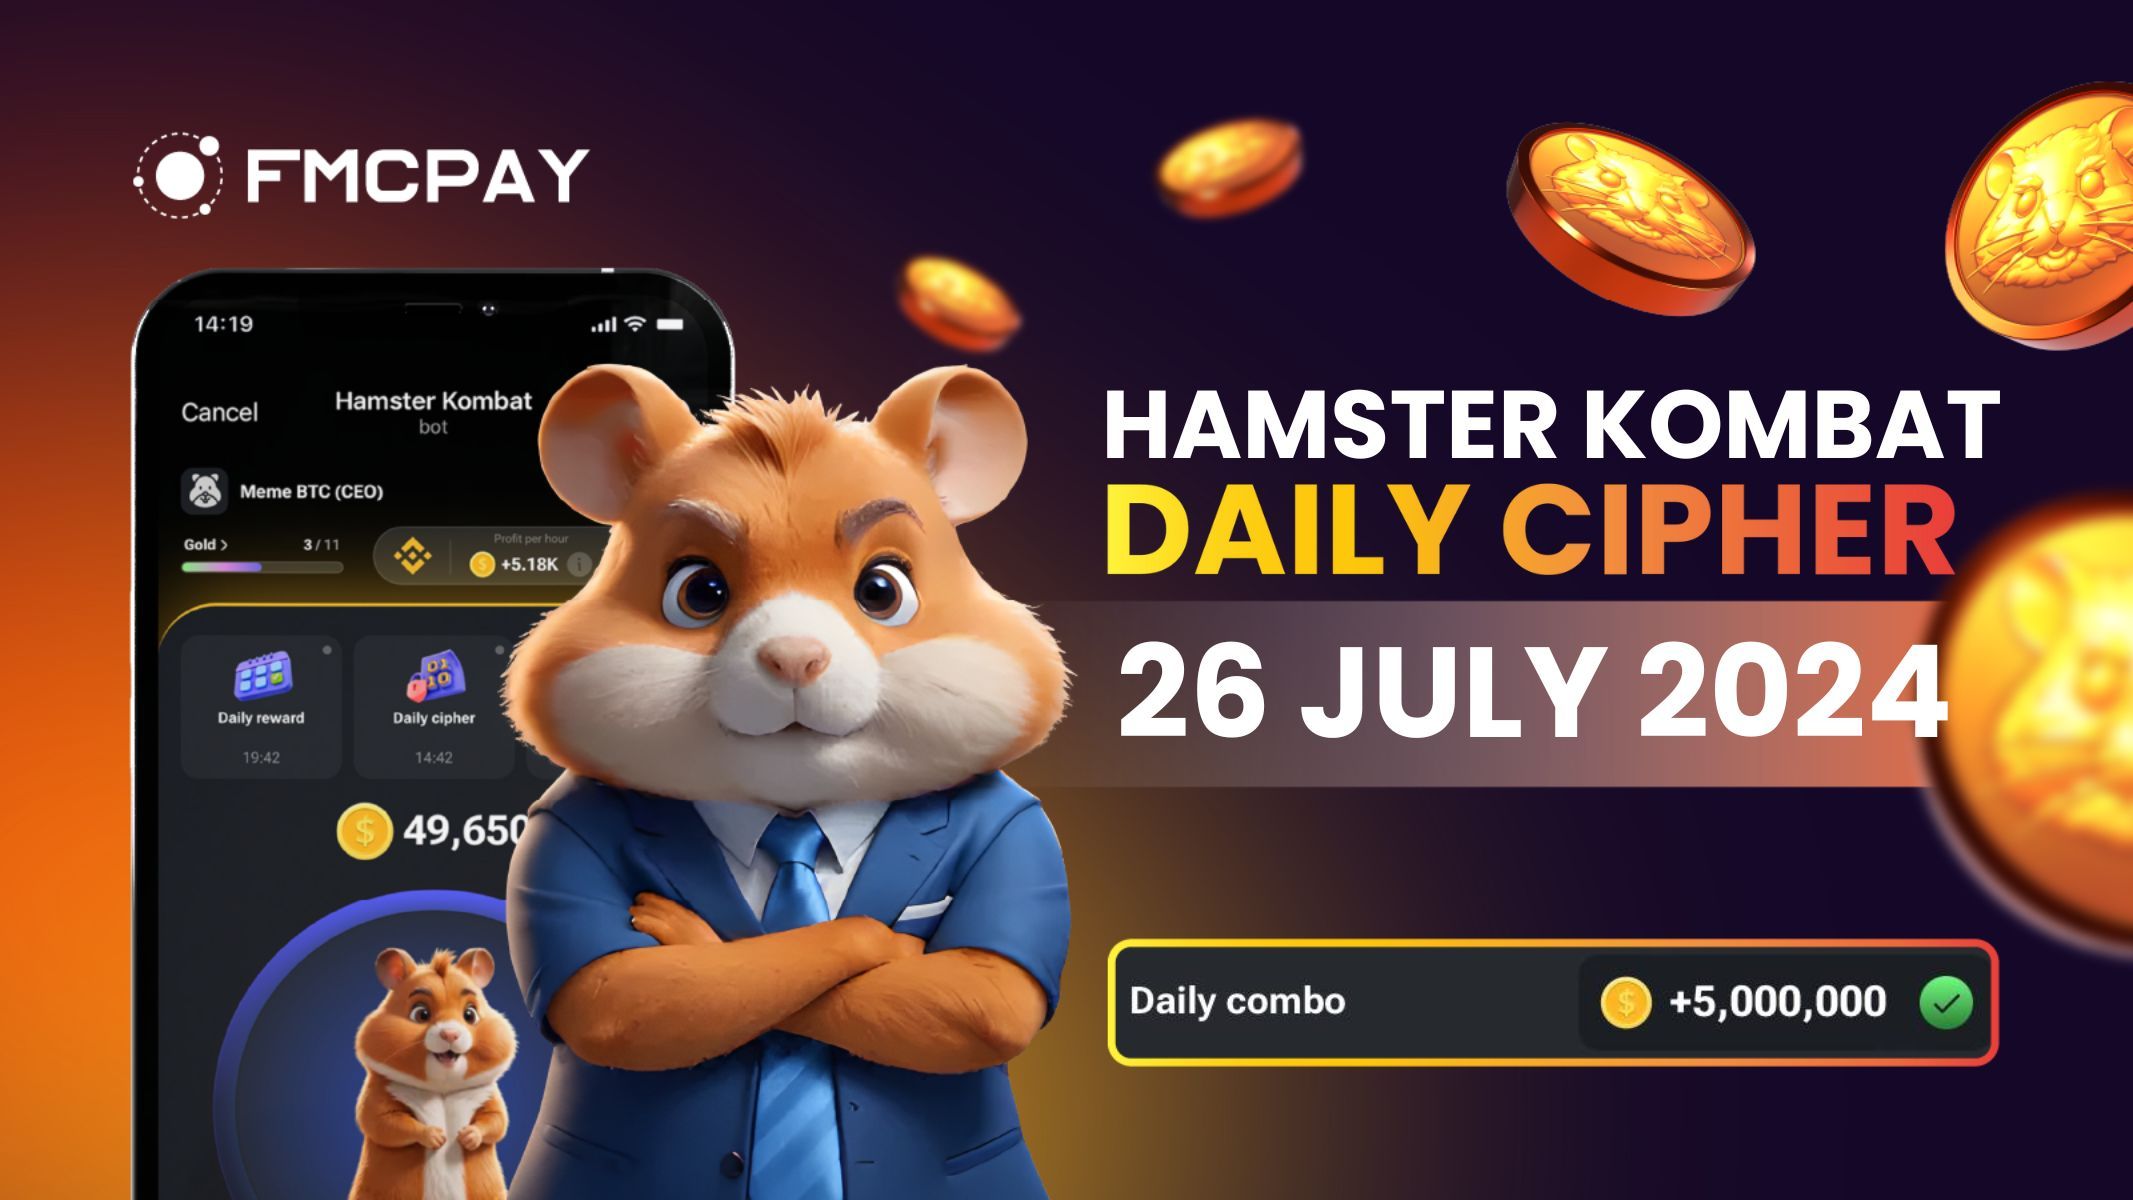 fmcpay-hamster-kombat-daily-cipher-july-26-1m-coins-for-today